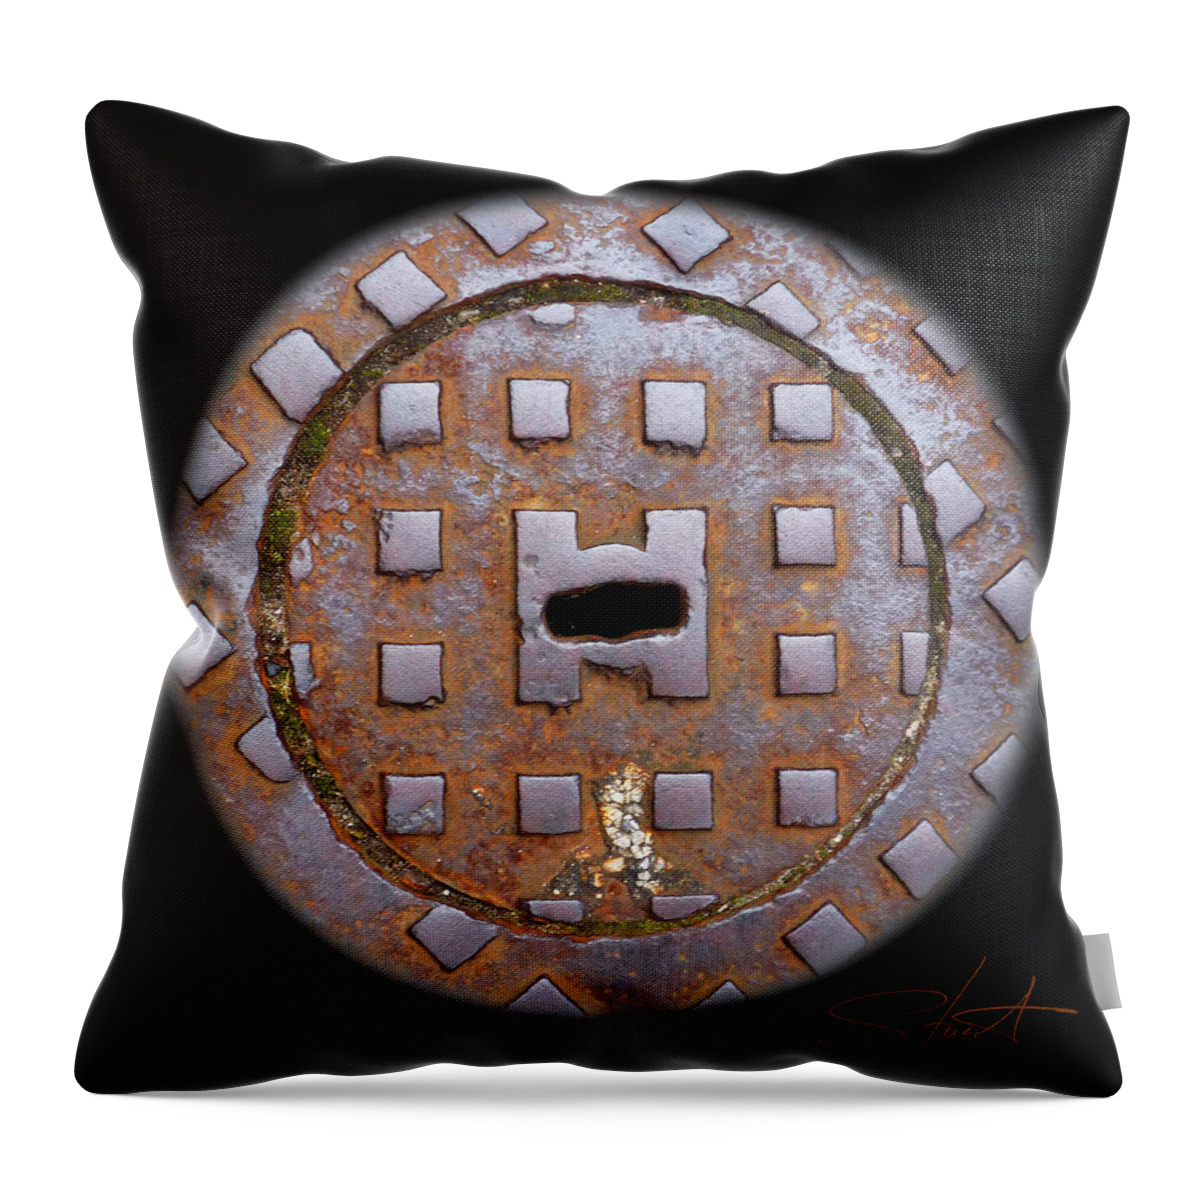  Throw Pillow featuring the photograph Face 2 by Charles Stuart